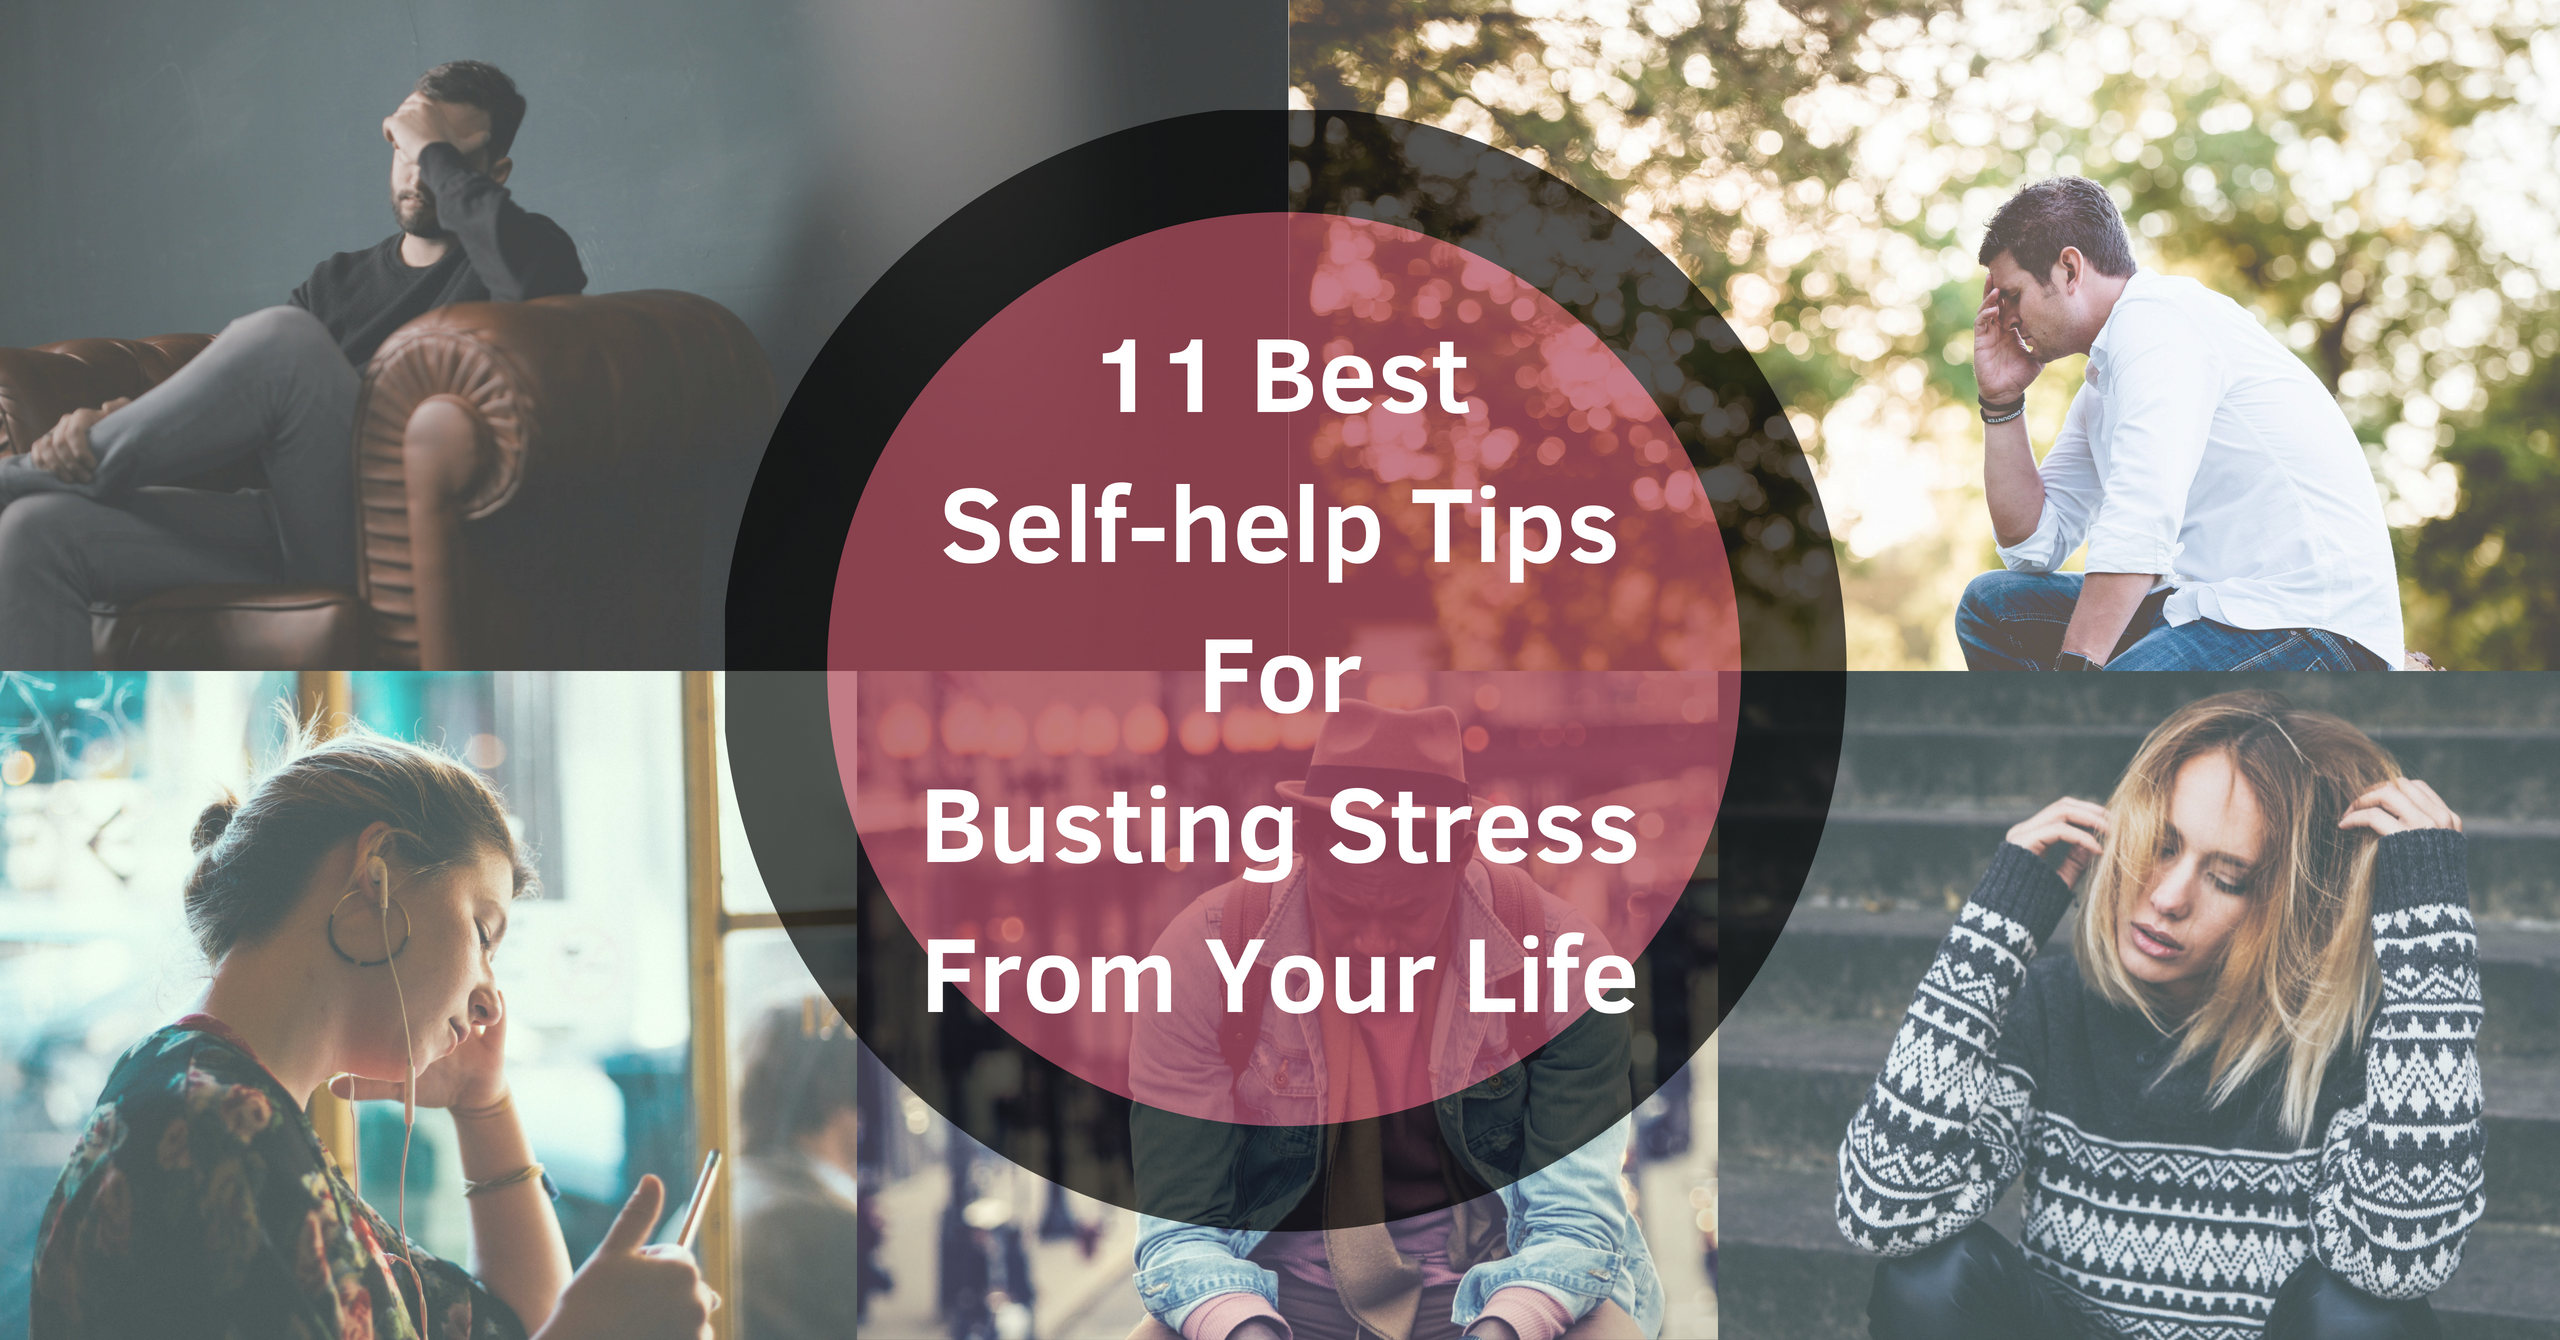 11 Best Self-Help Tips For Busting Stress From Your Life